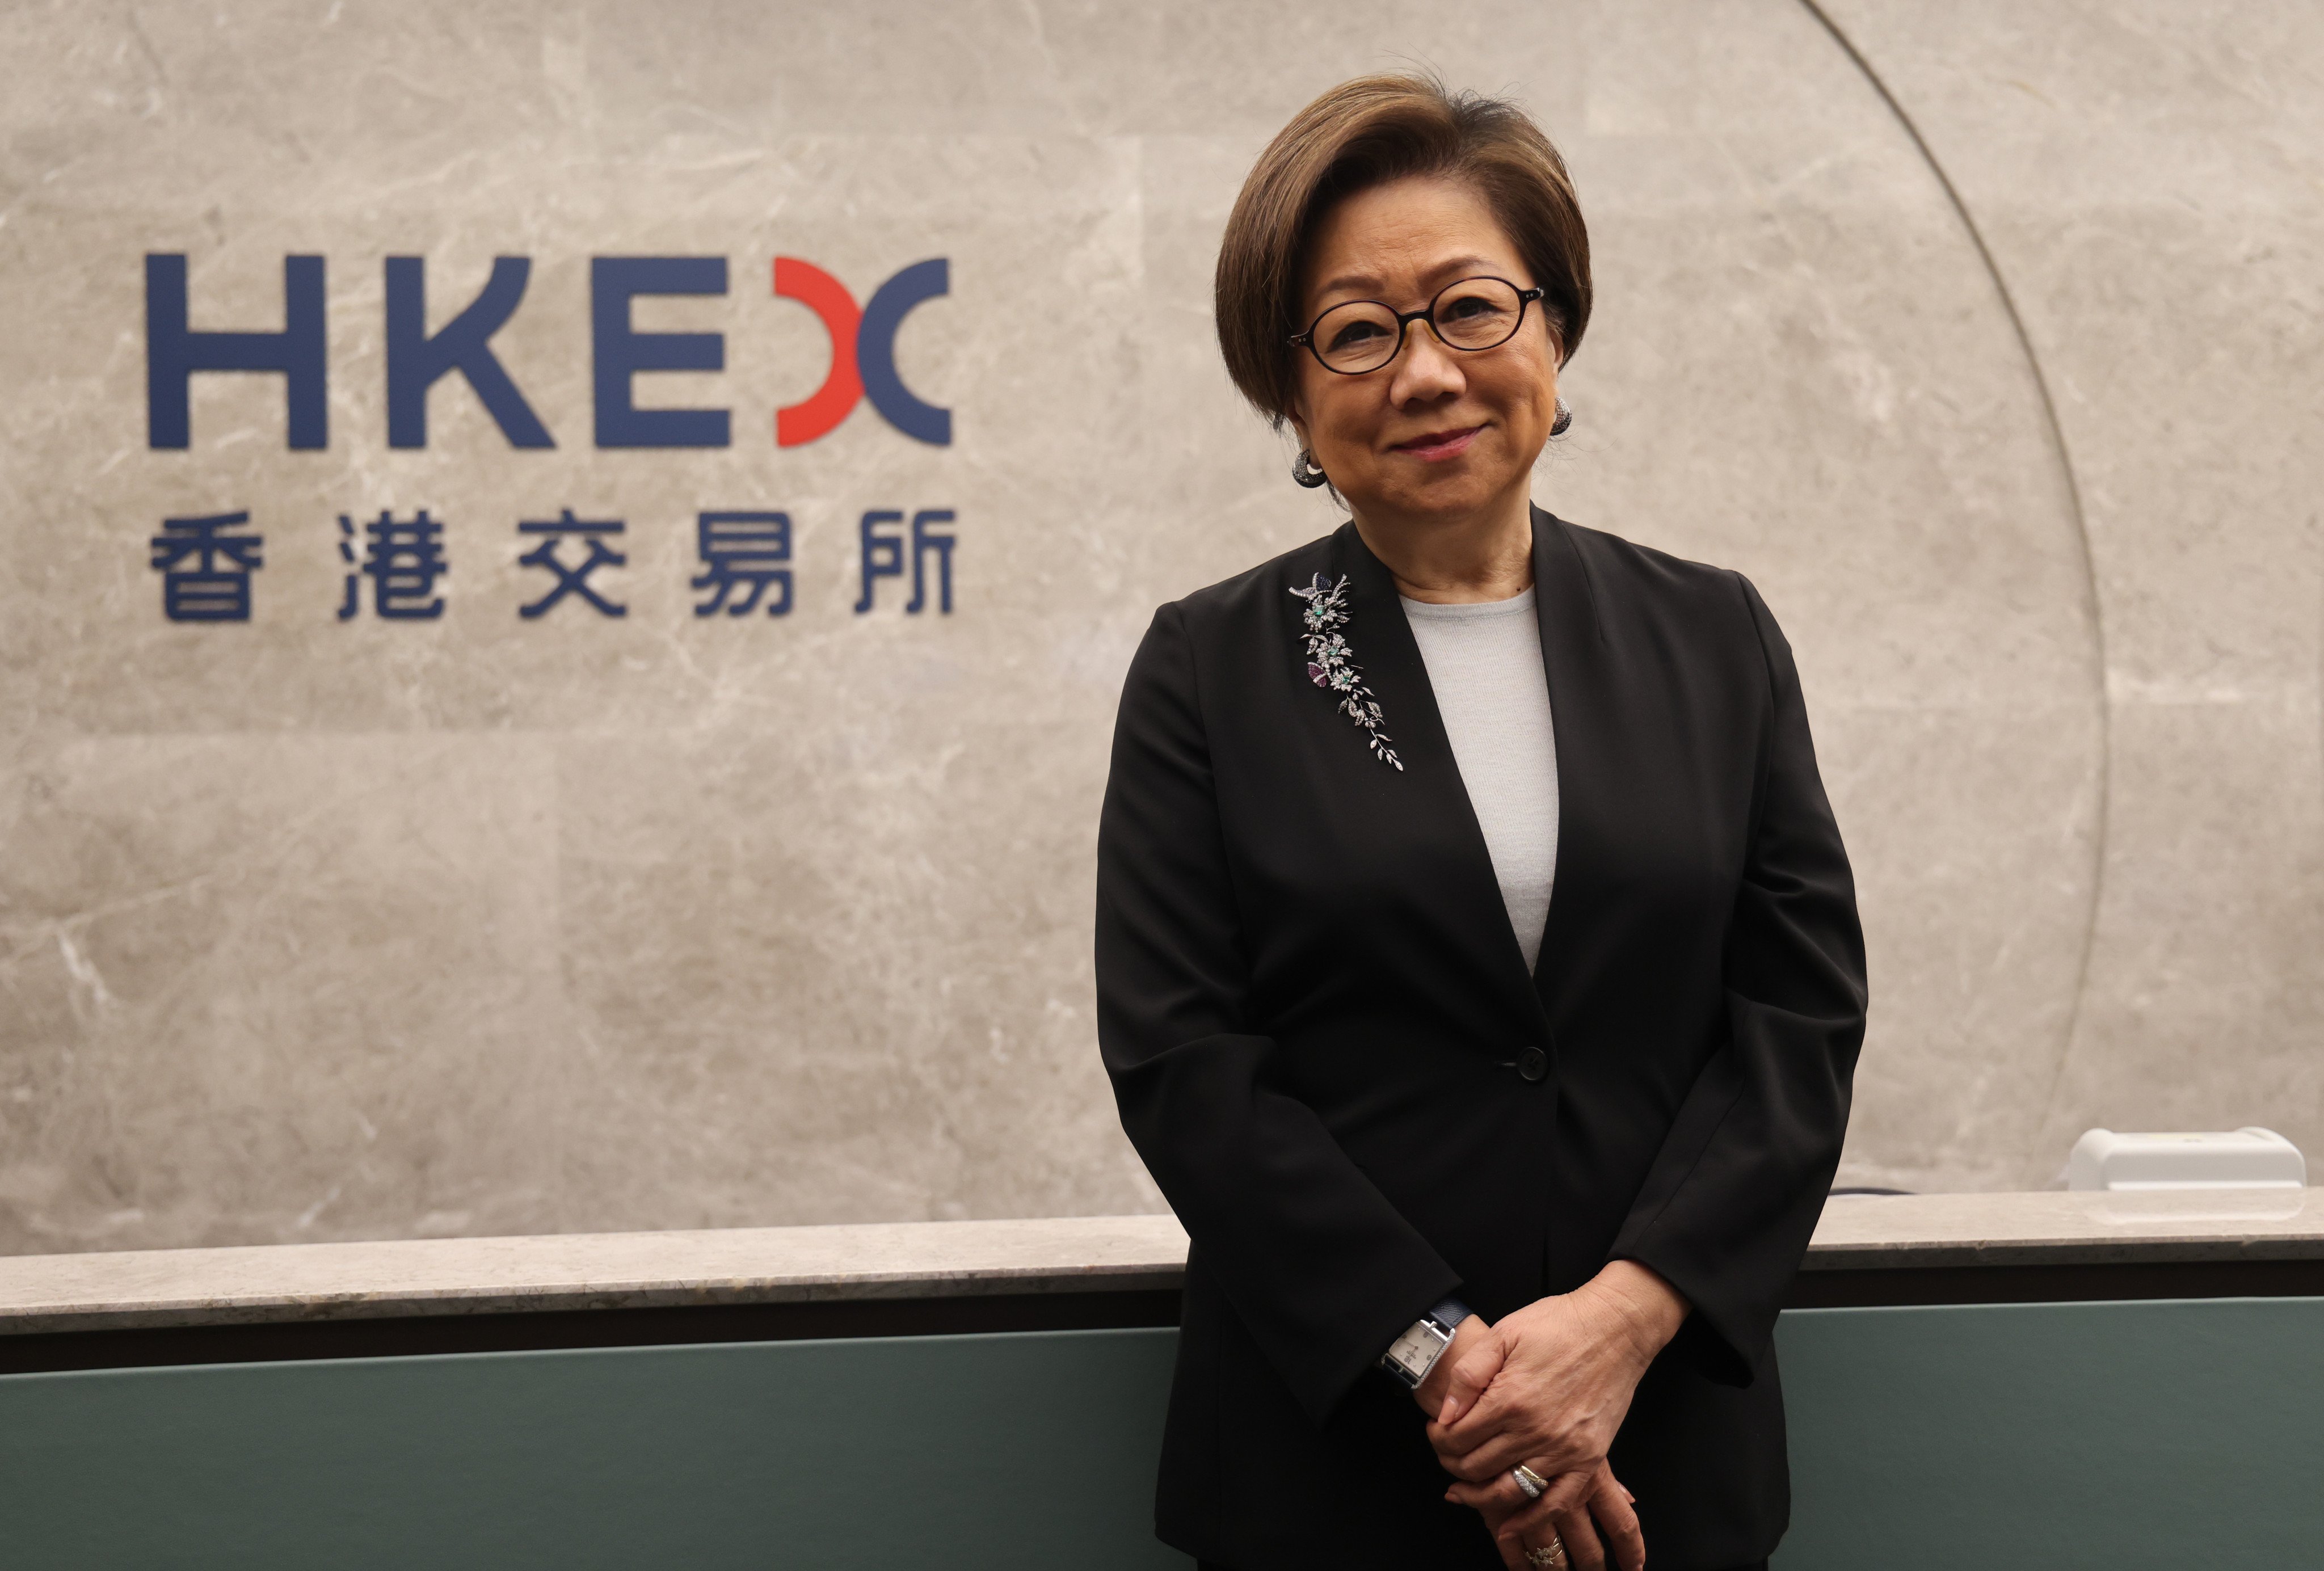 ‘Outside Asia, there is not a lot of recognition. We have to raise our profile to attract investors,’ says Laura Cha, outgoing chairman of Hong Kong Exchanges and Clearing. Photo: Jelly Tse